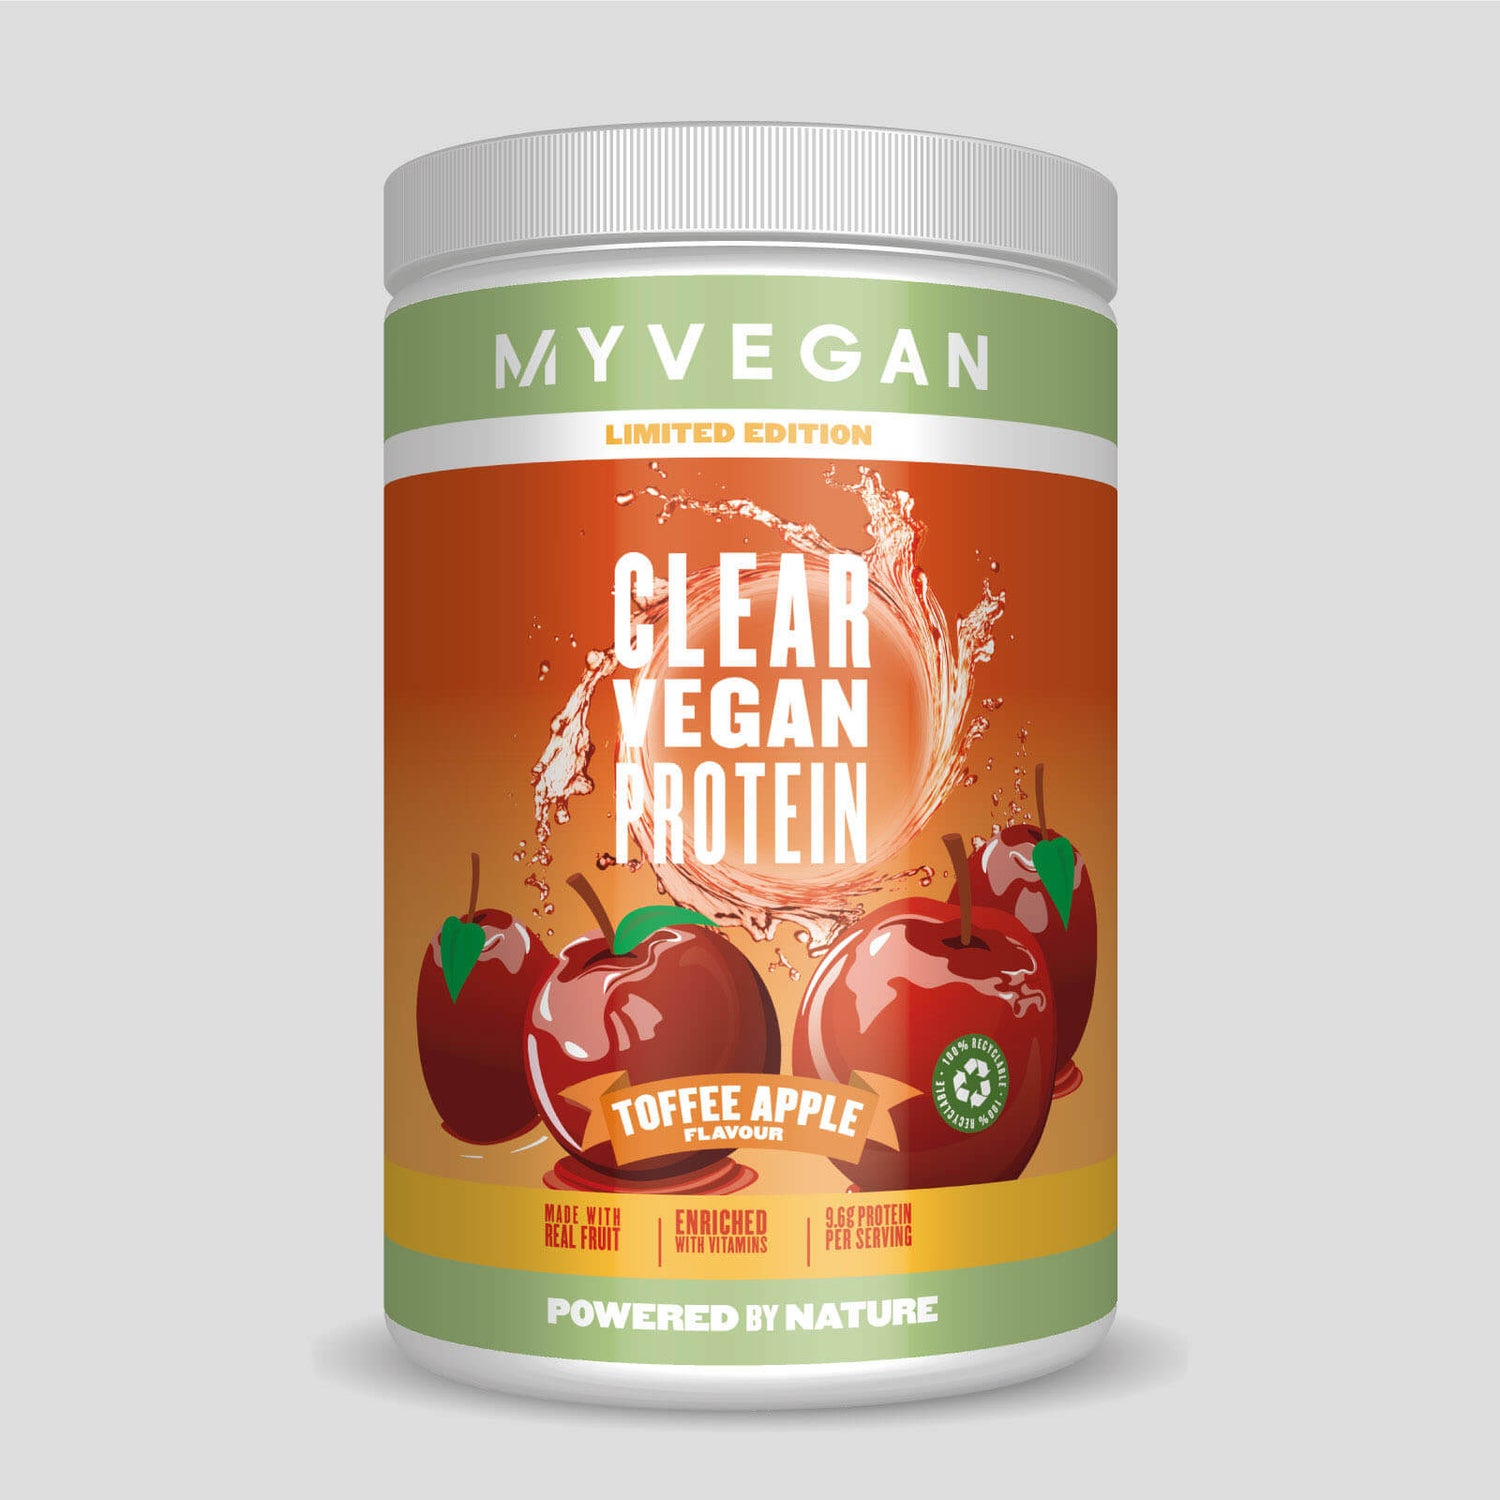 Clear Vegan Protein – Toffee Apple flavour - 320g - Toffee Apple